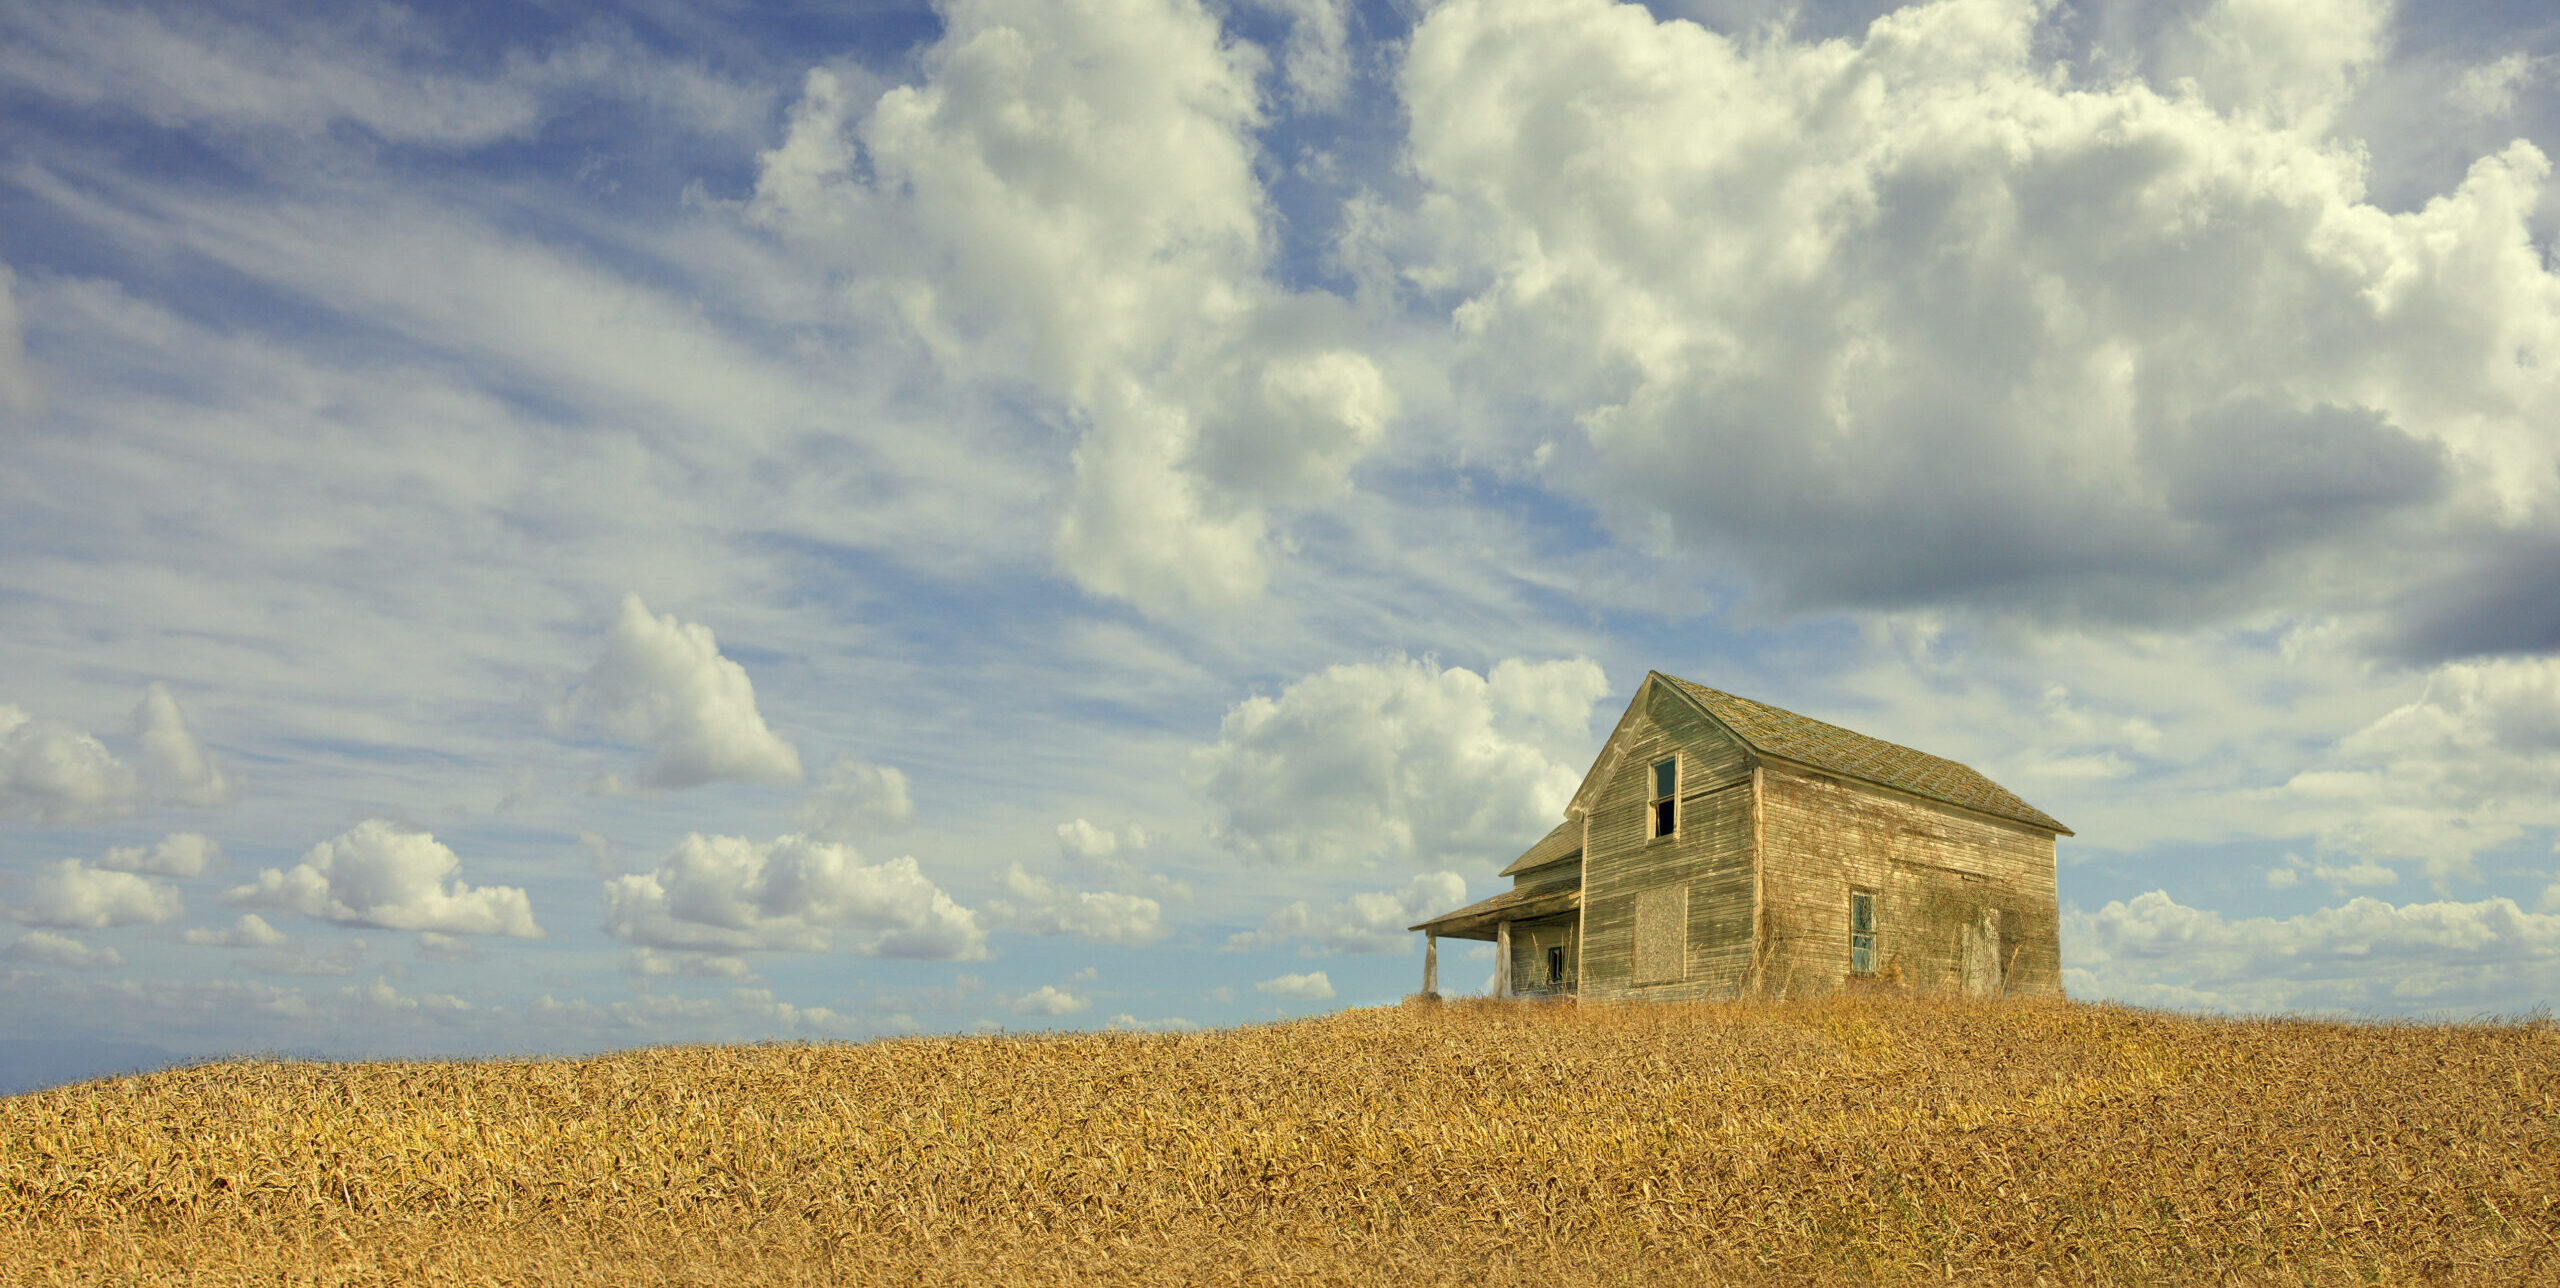 Clouds over remote wooden farmhouse (Chris Clor/Tetra Images via Getty Images)